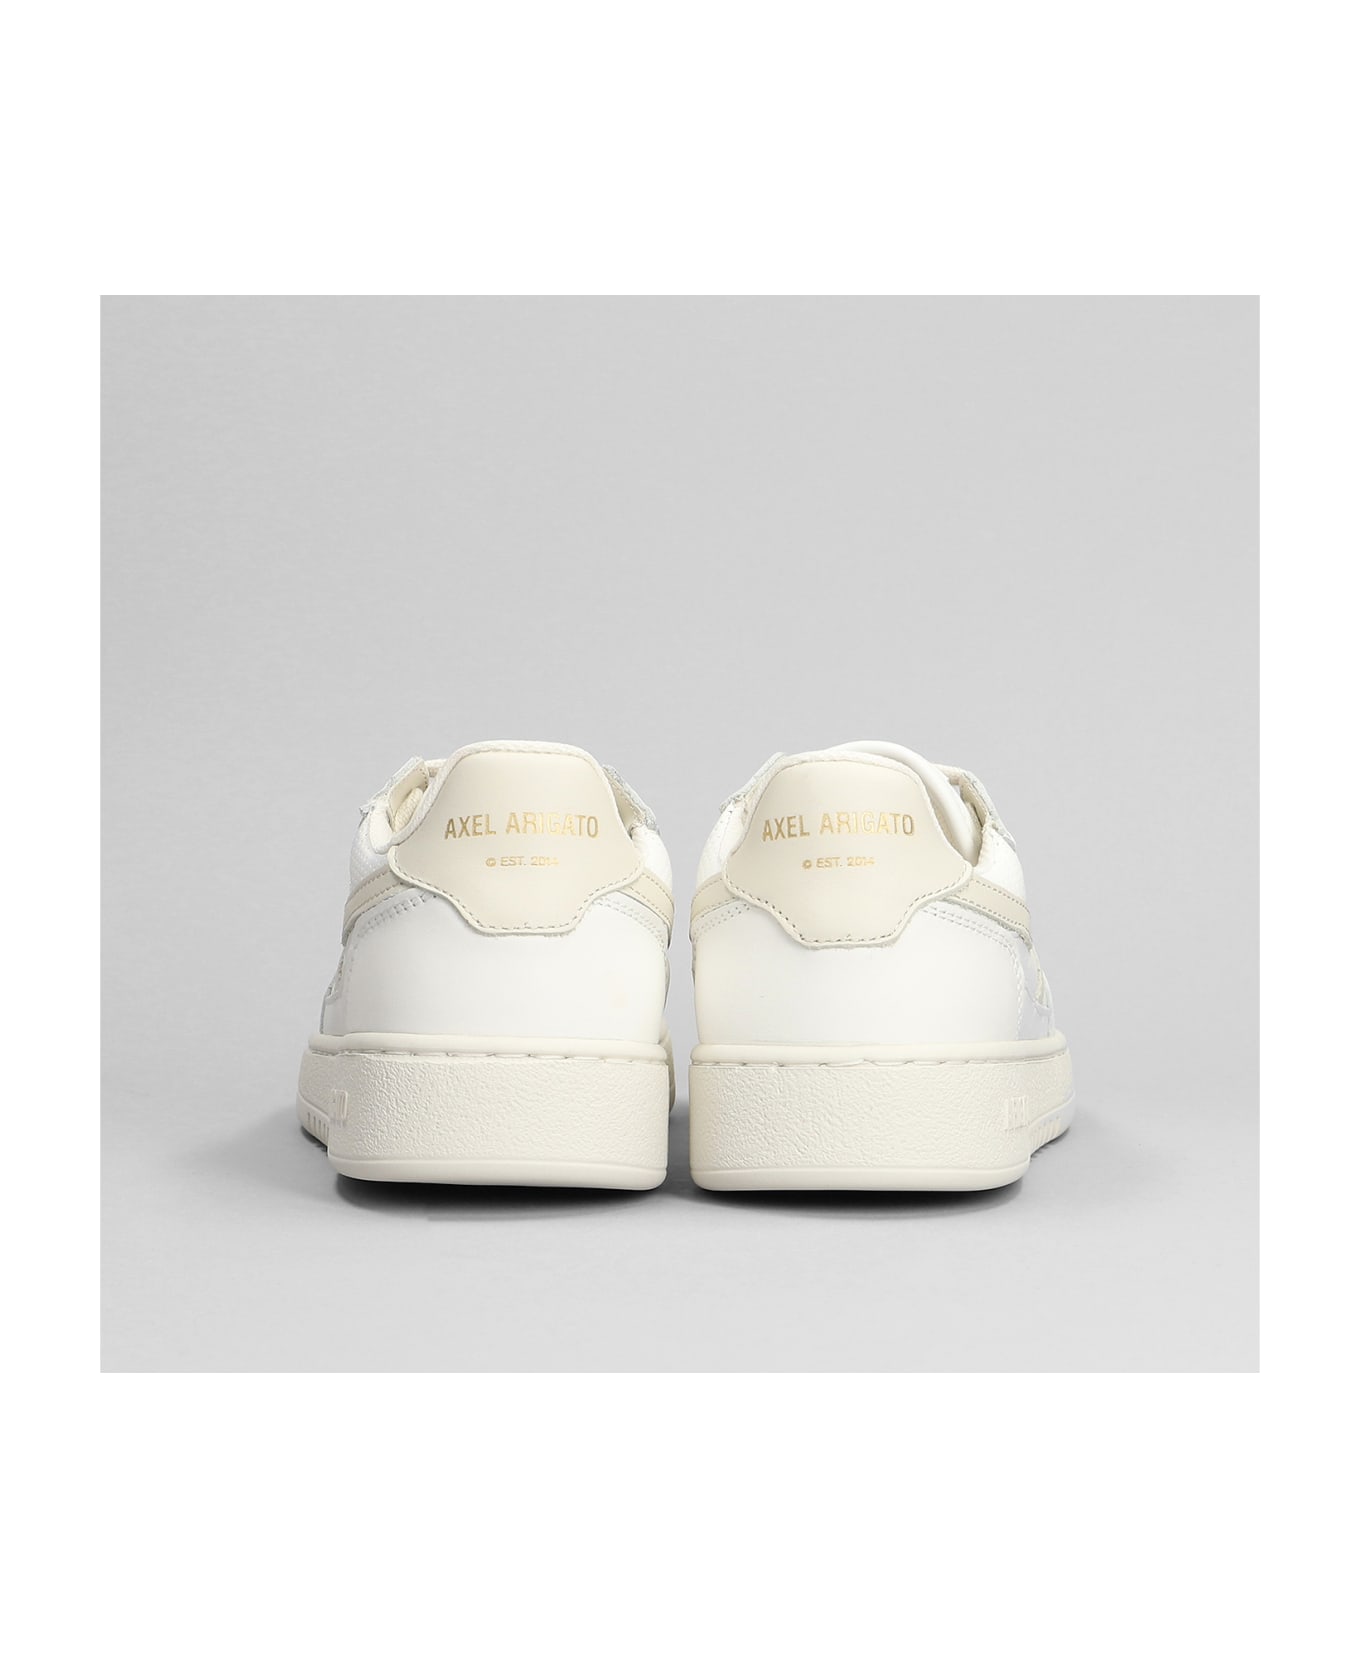 Axel Arigato Dice-a Sneaker Sneakers In White Leather - white スニーカー